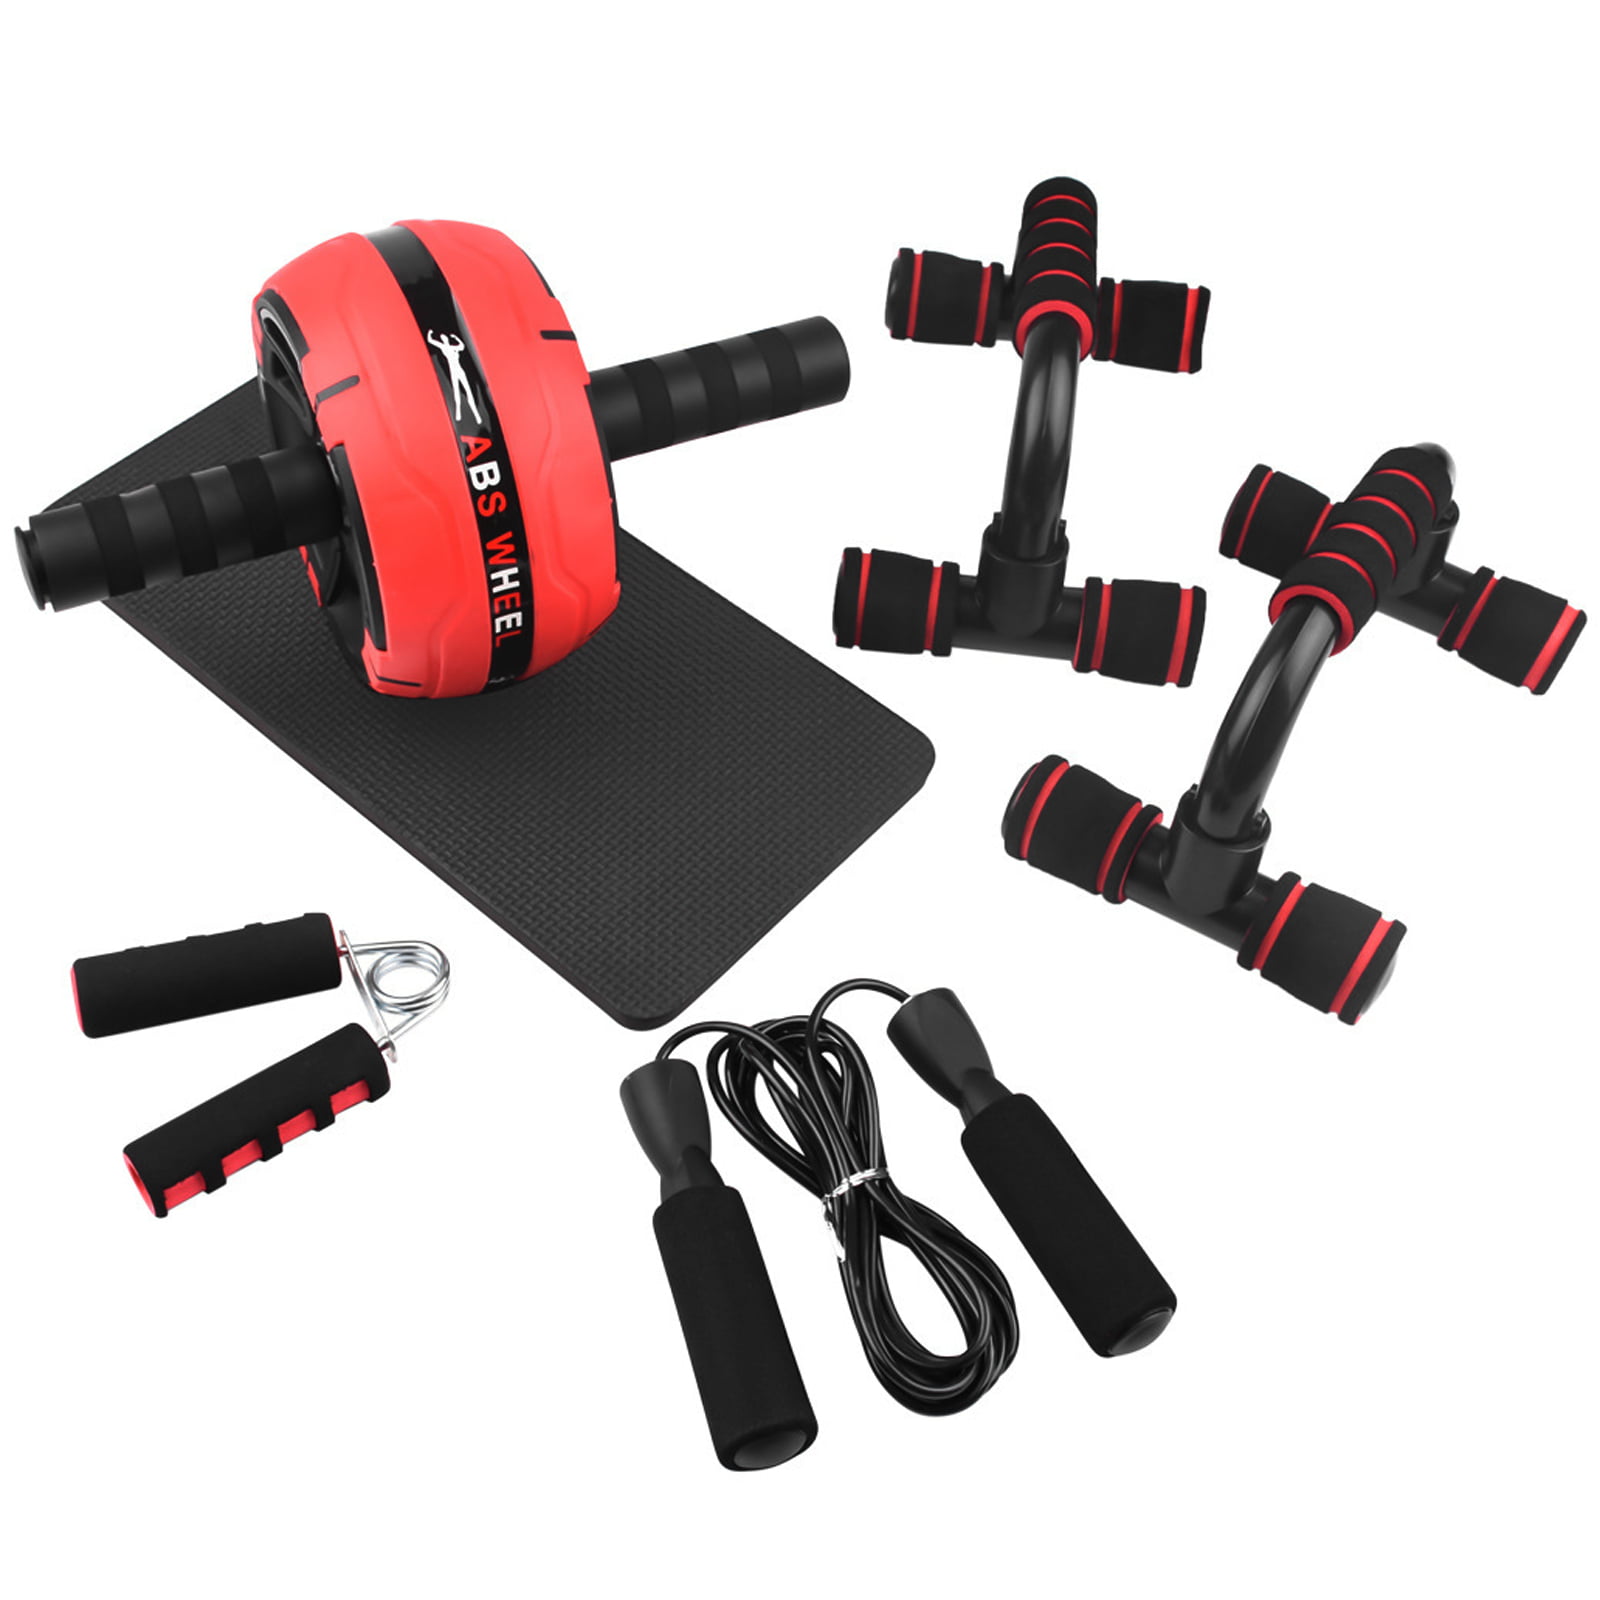 Details about   Fitness Abdominal Trainer Kit AB Wheel Roller Push-Up Bars Jump Rope Knee Pad US 